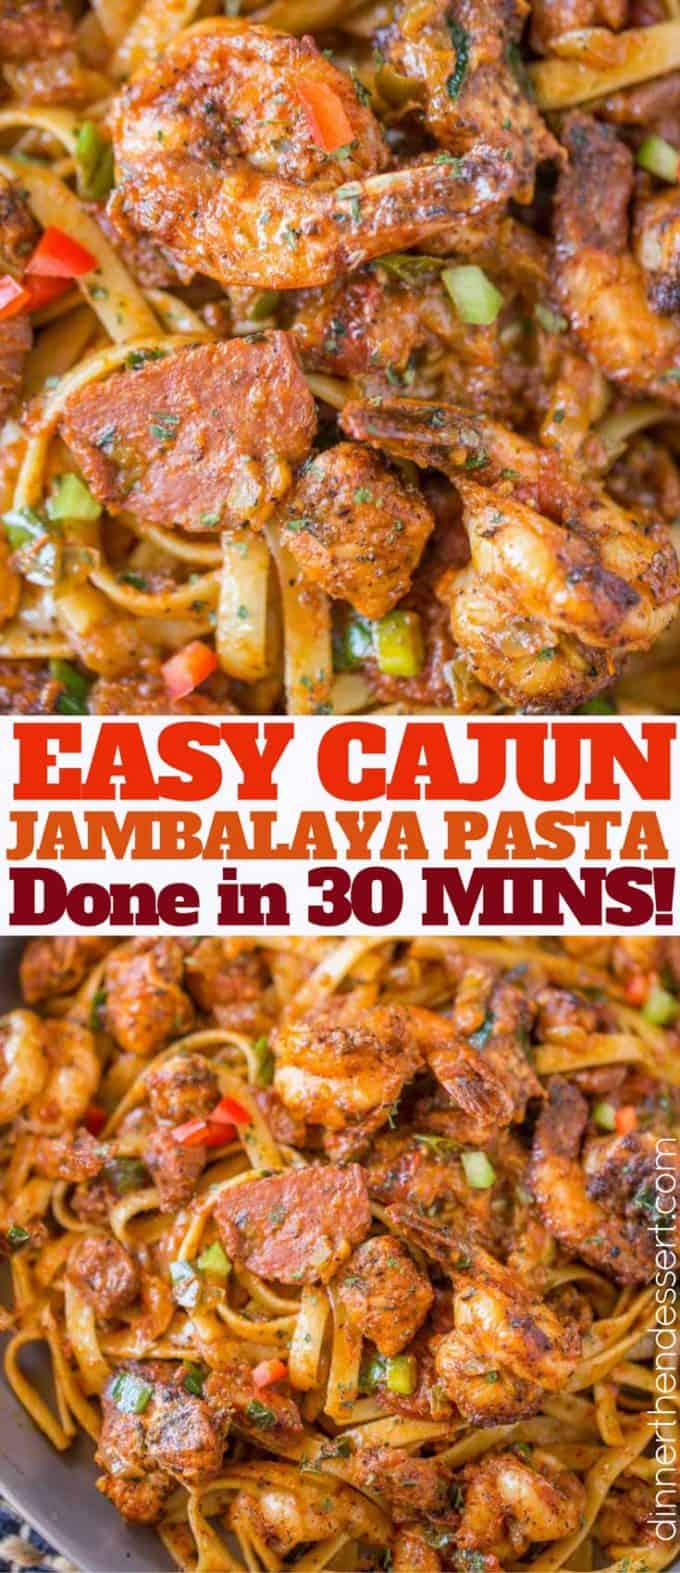 Easy Cajun Jambalaya Pasta with chicken, sausage and shrimp and all the delicious deep Louisiana flavor in just 30 minutes!